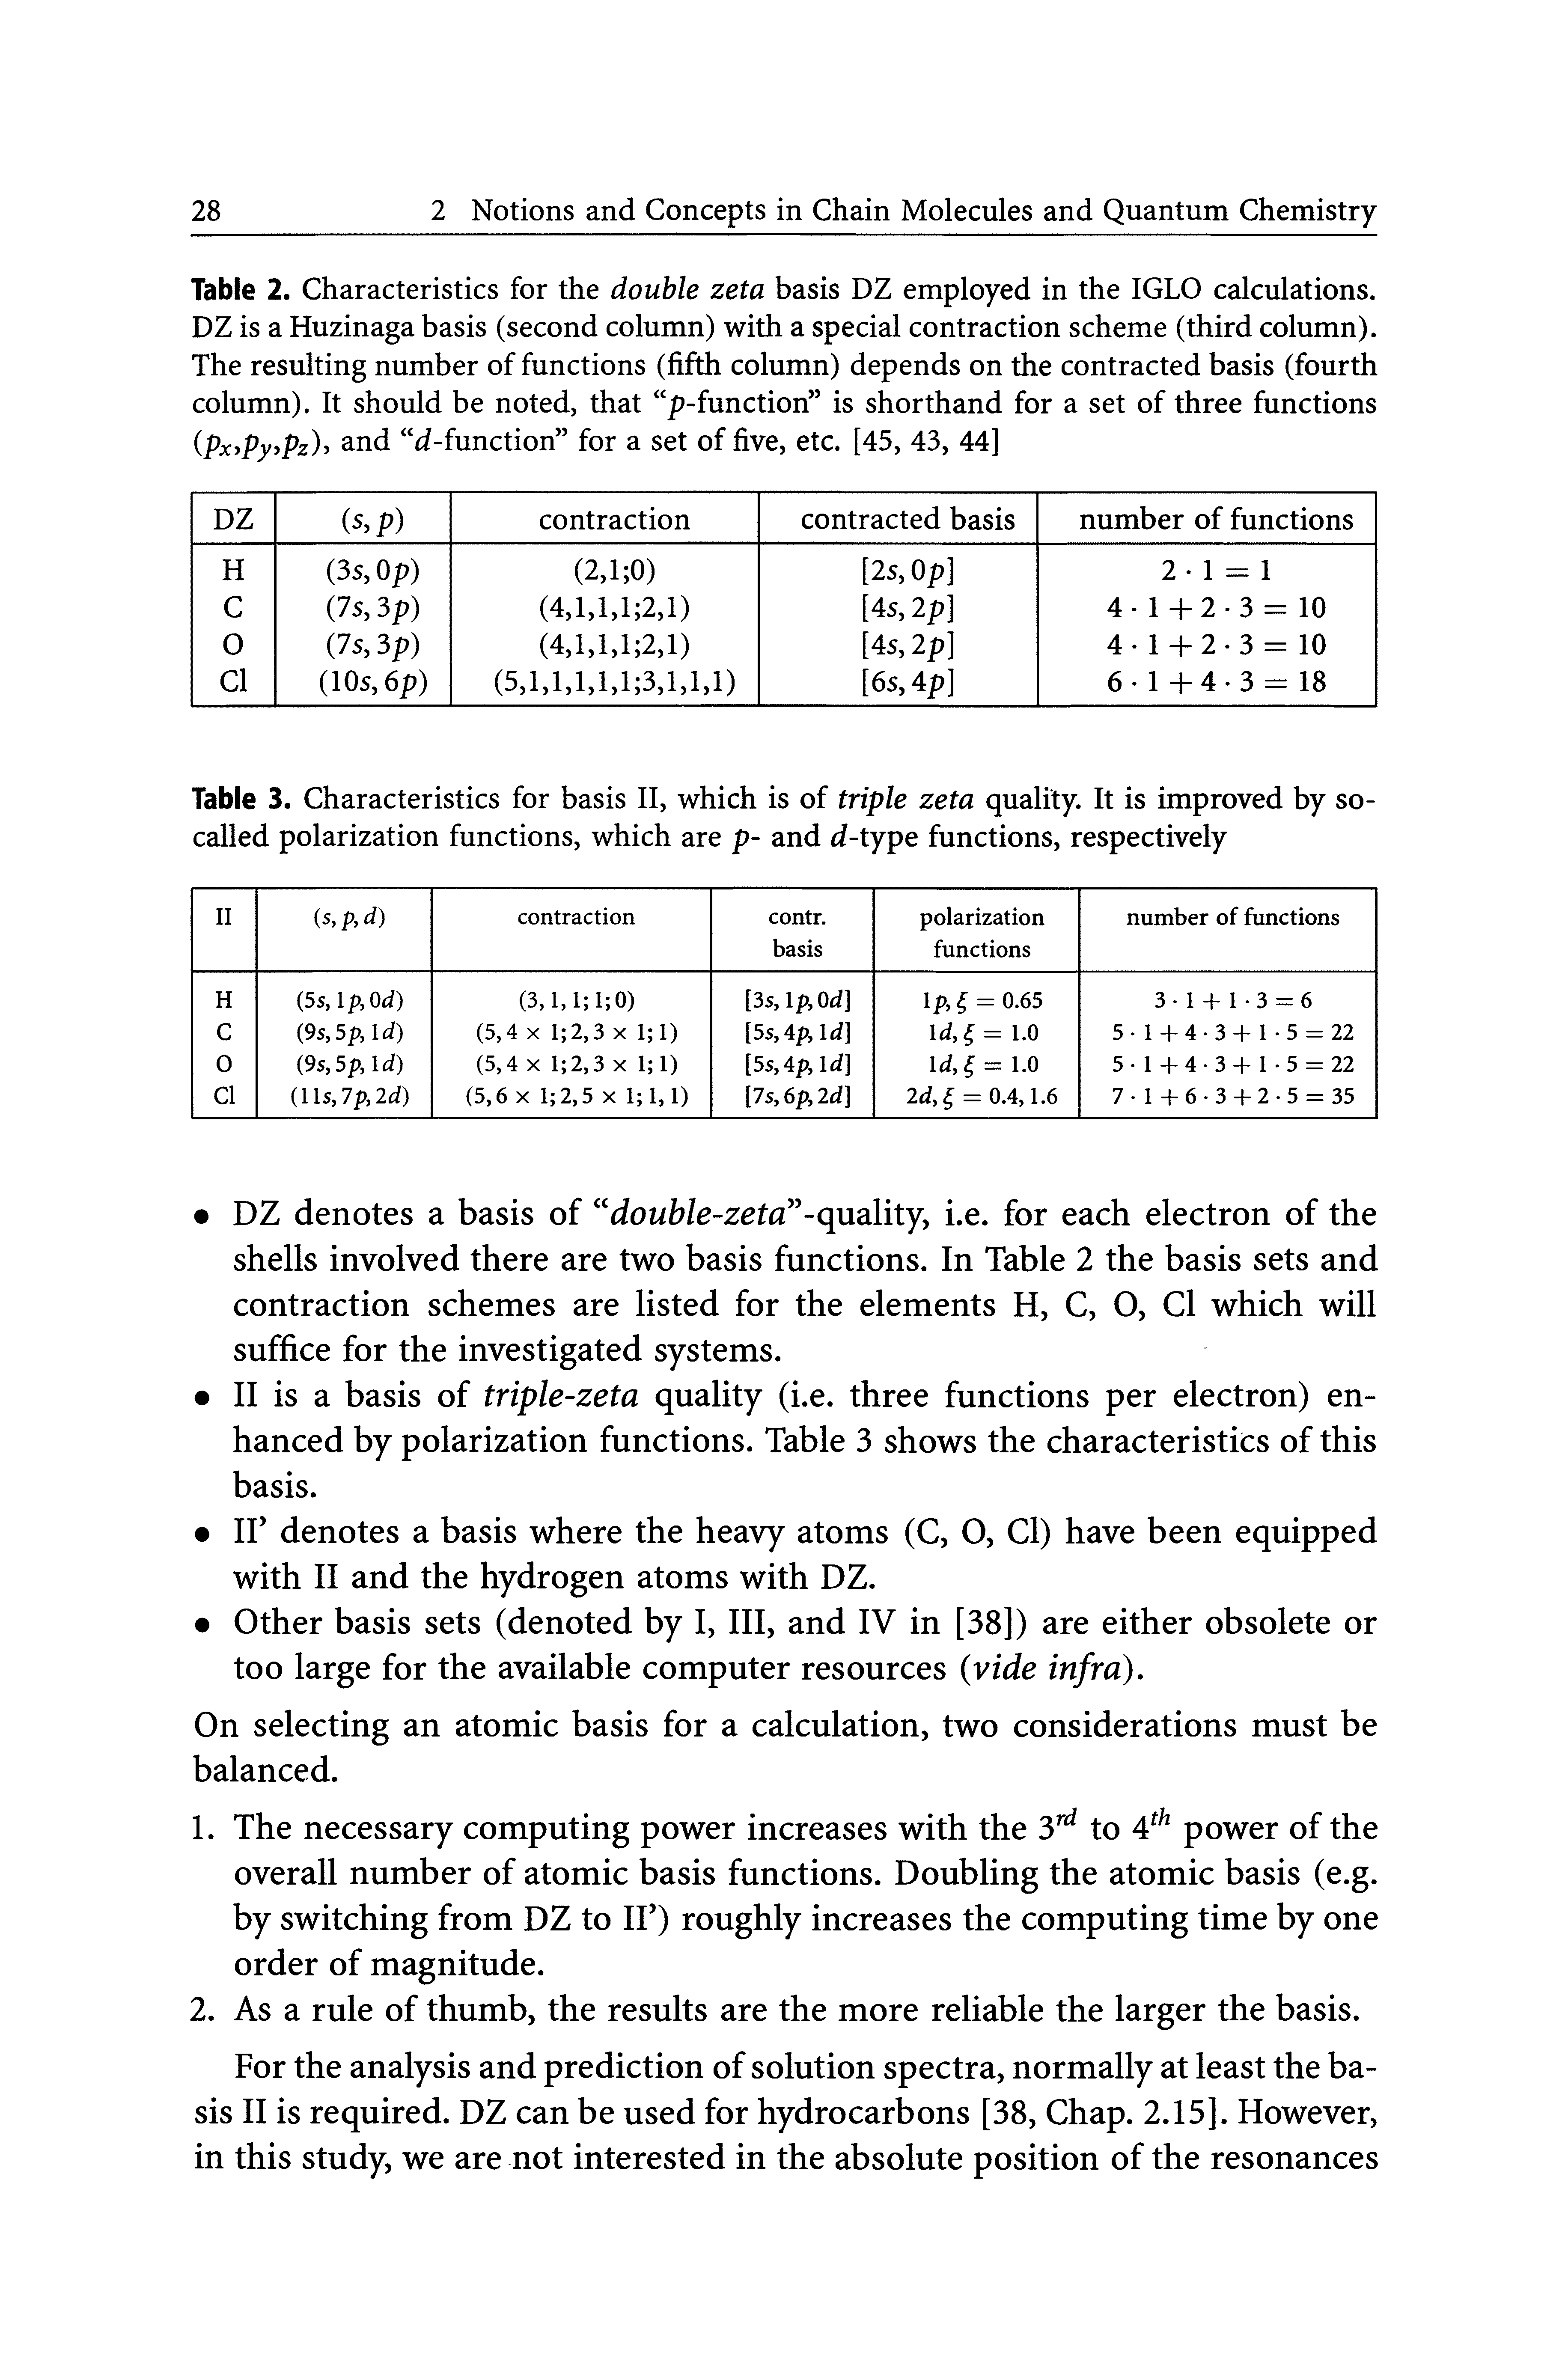 Table 2. Characteristics for the double zeta basis DZ employed in the IGLO calculations. DZ is a Huzinaga basis (second column) with a special contraction scheme (third column). The resulting number of functions (fifth column) depends on the contracted basis (fourth column). It should be noted, that p-function is shorthand for a set of three functions ipxypyypz)y and d-function for a set of five, etc. [45, 43, 44]...